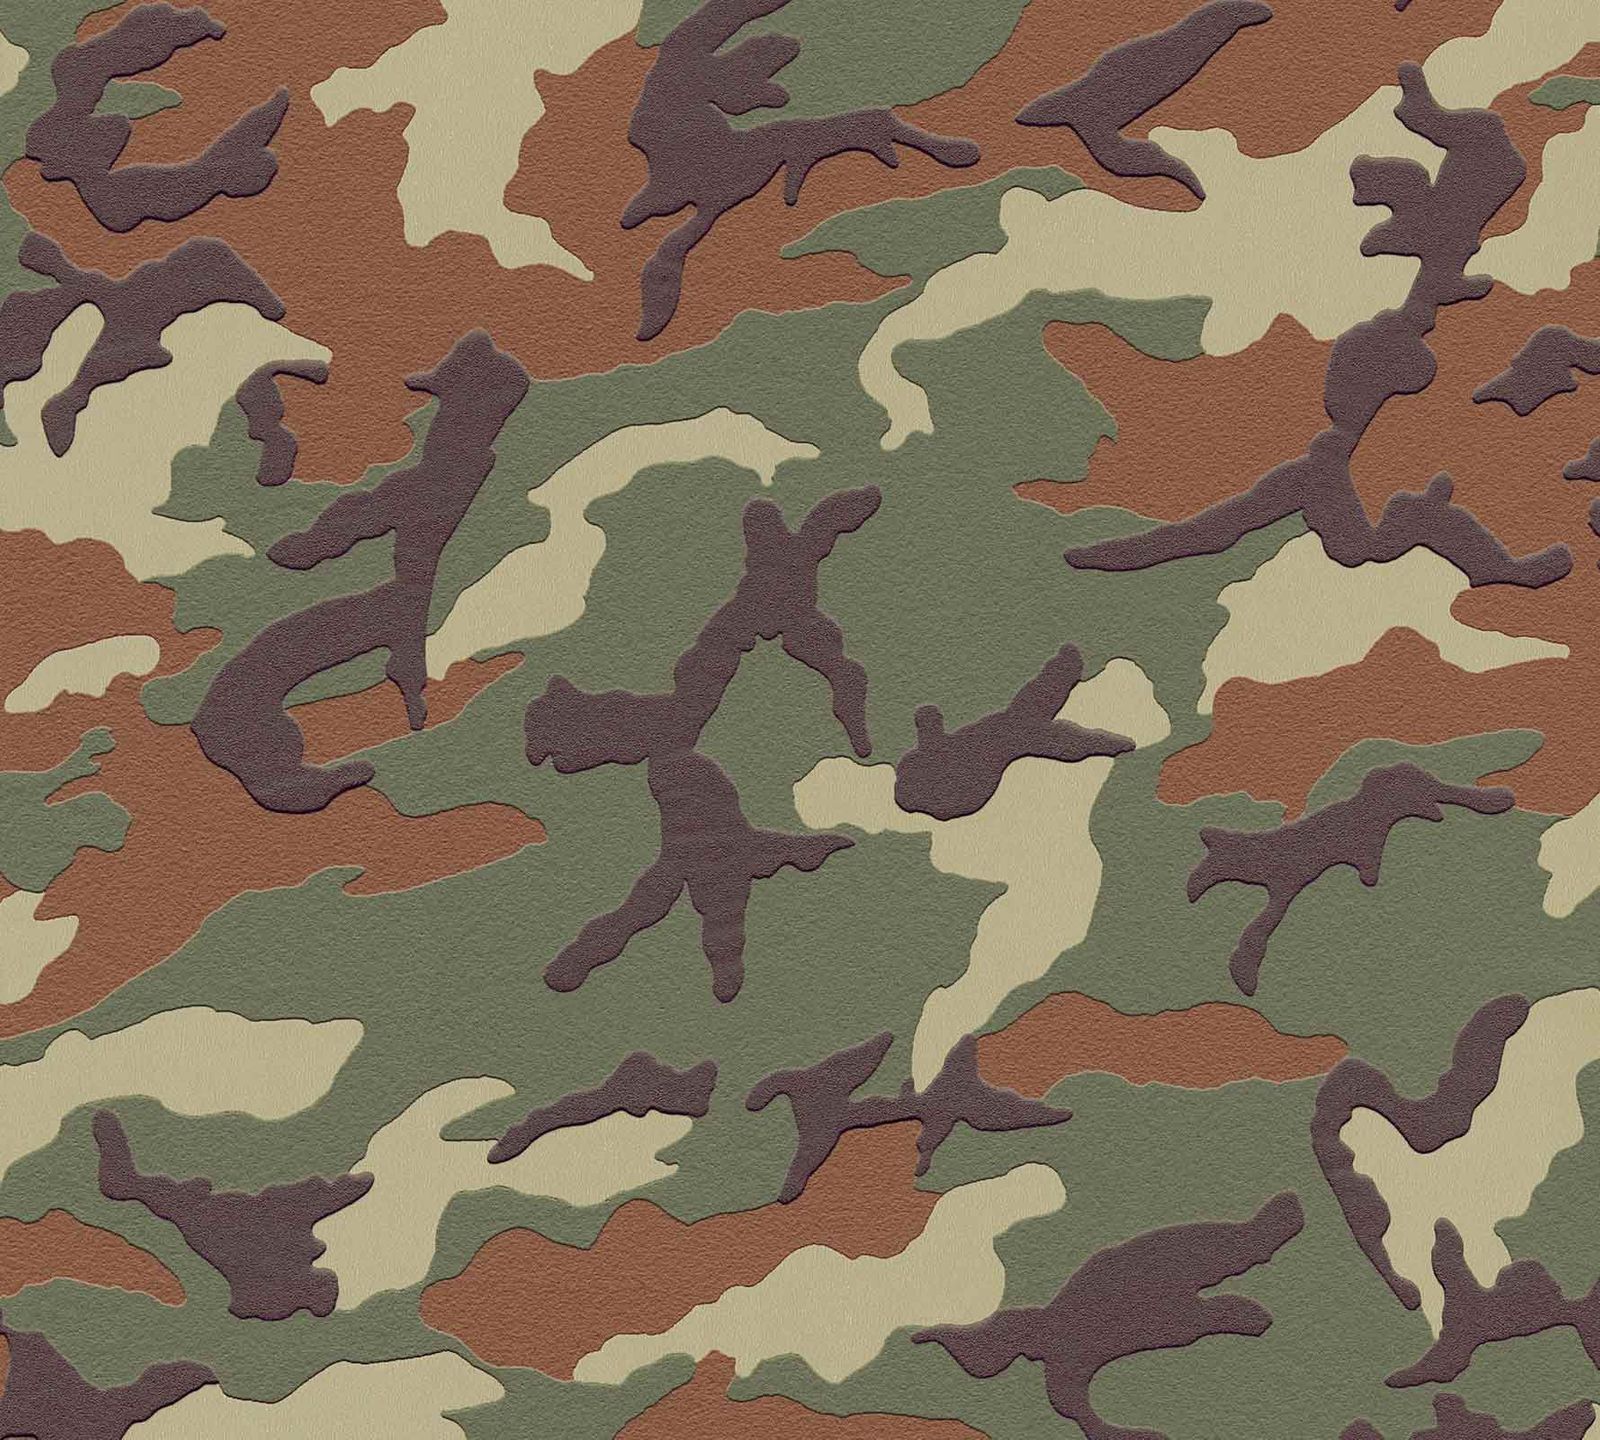 green brown wallpaper,military camouflage,camouflage,pattern,clothing,uniform